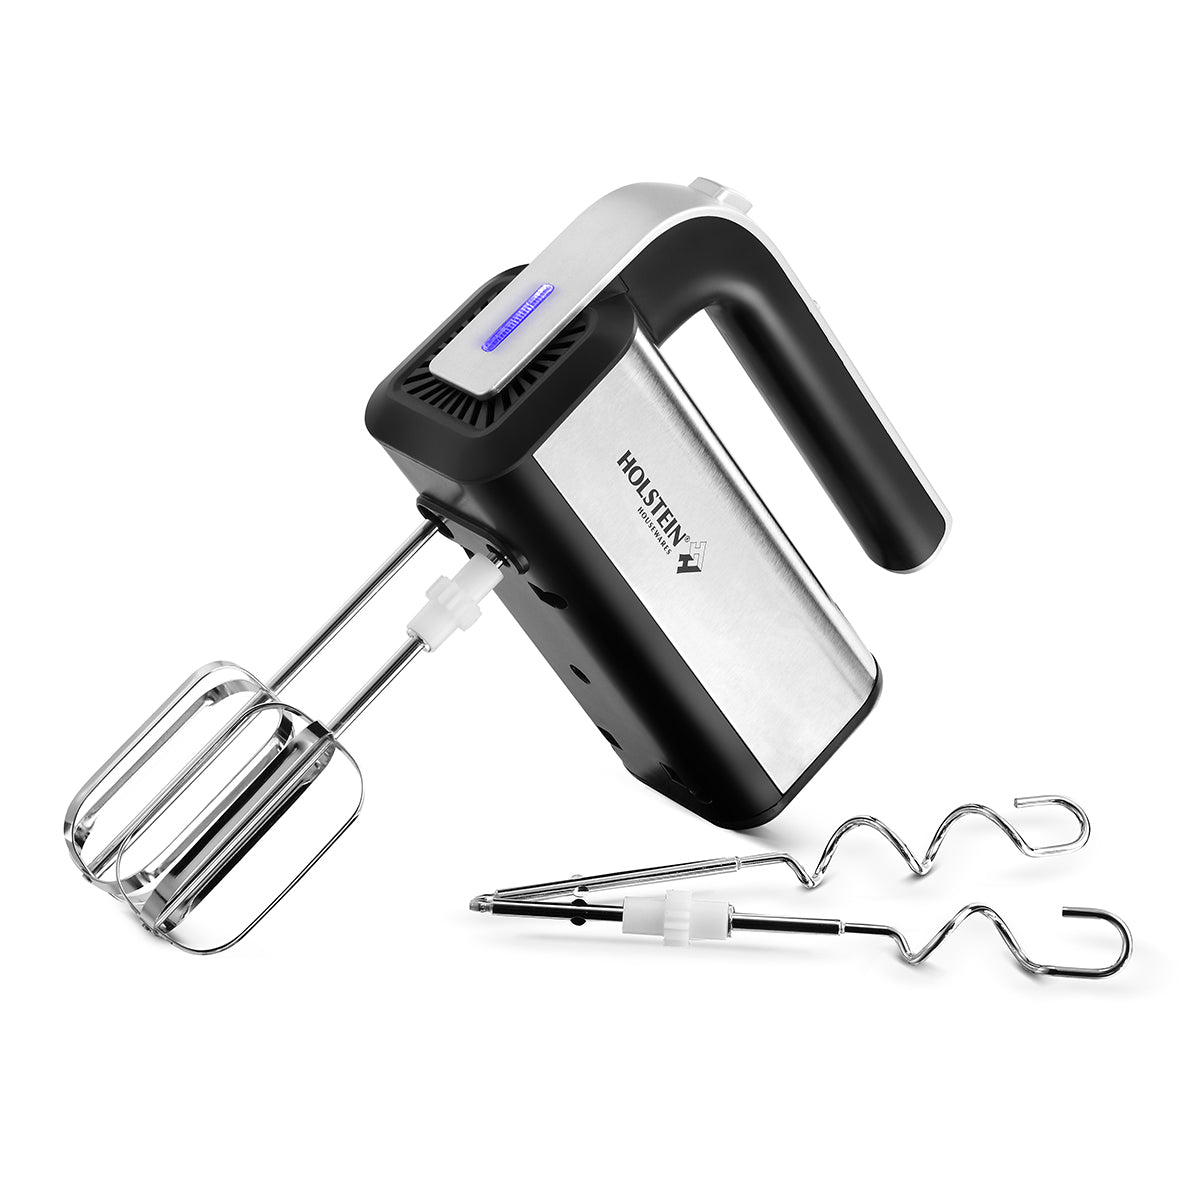 5-SPEED HAND AND STAND MIXER WITH LED